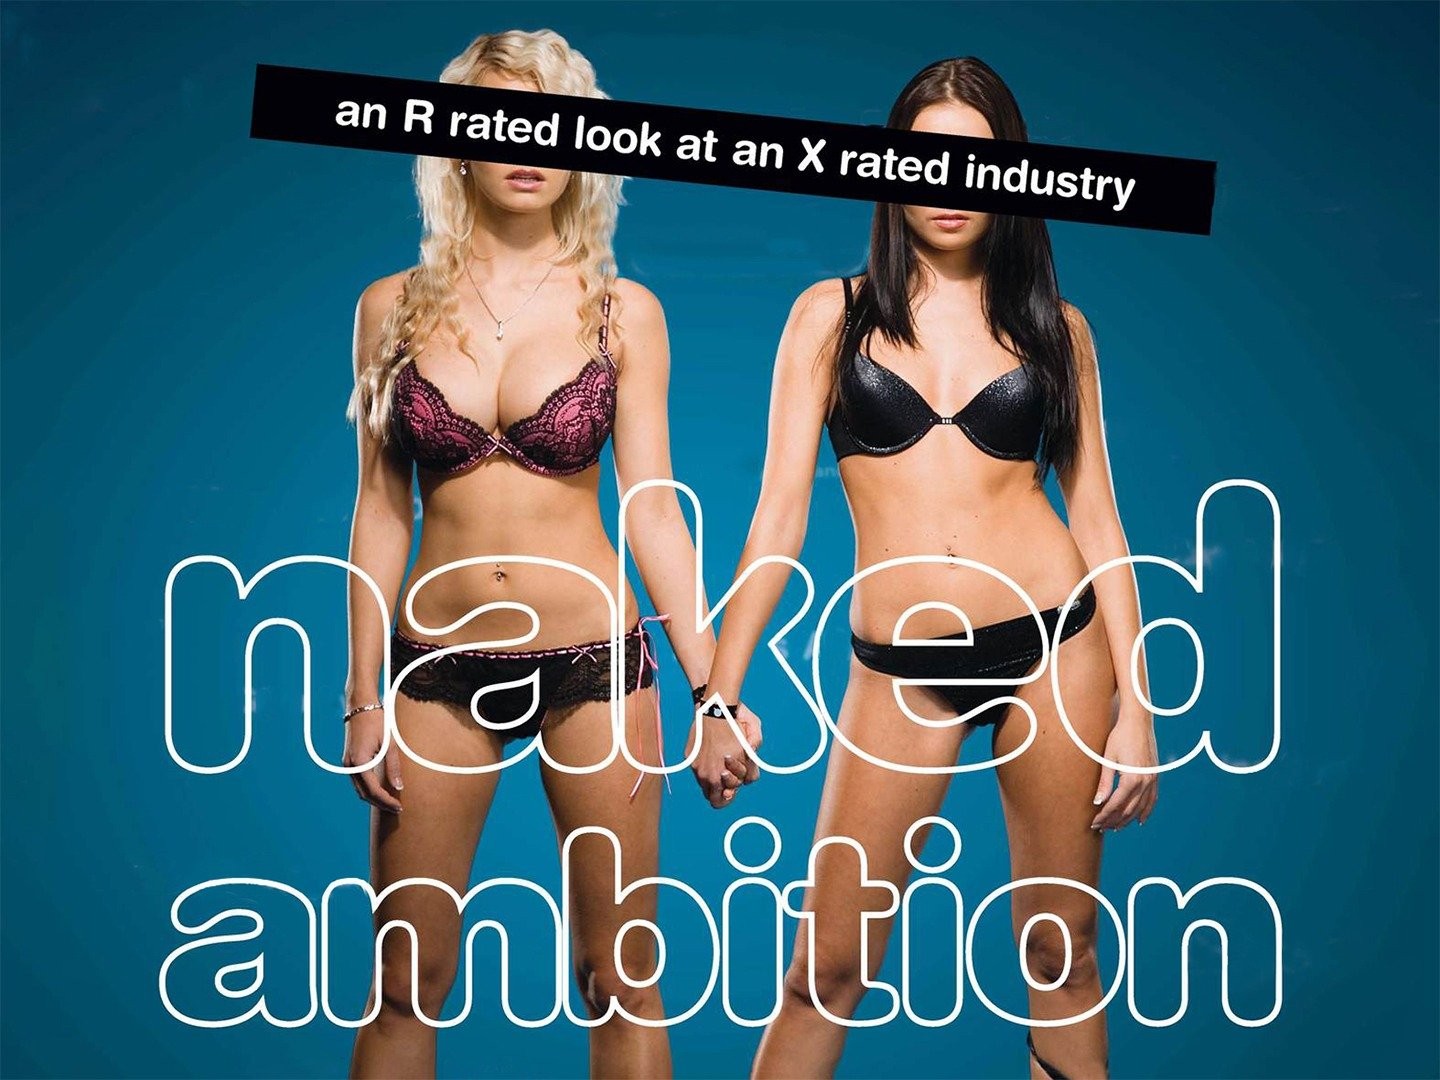 Naked Ambition: An R Rated Look at an X Rated Industry - Wikipedia